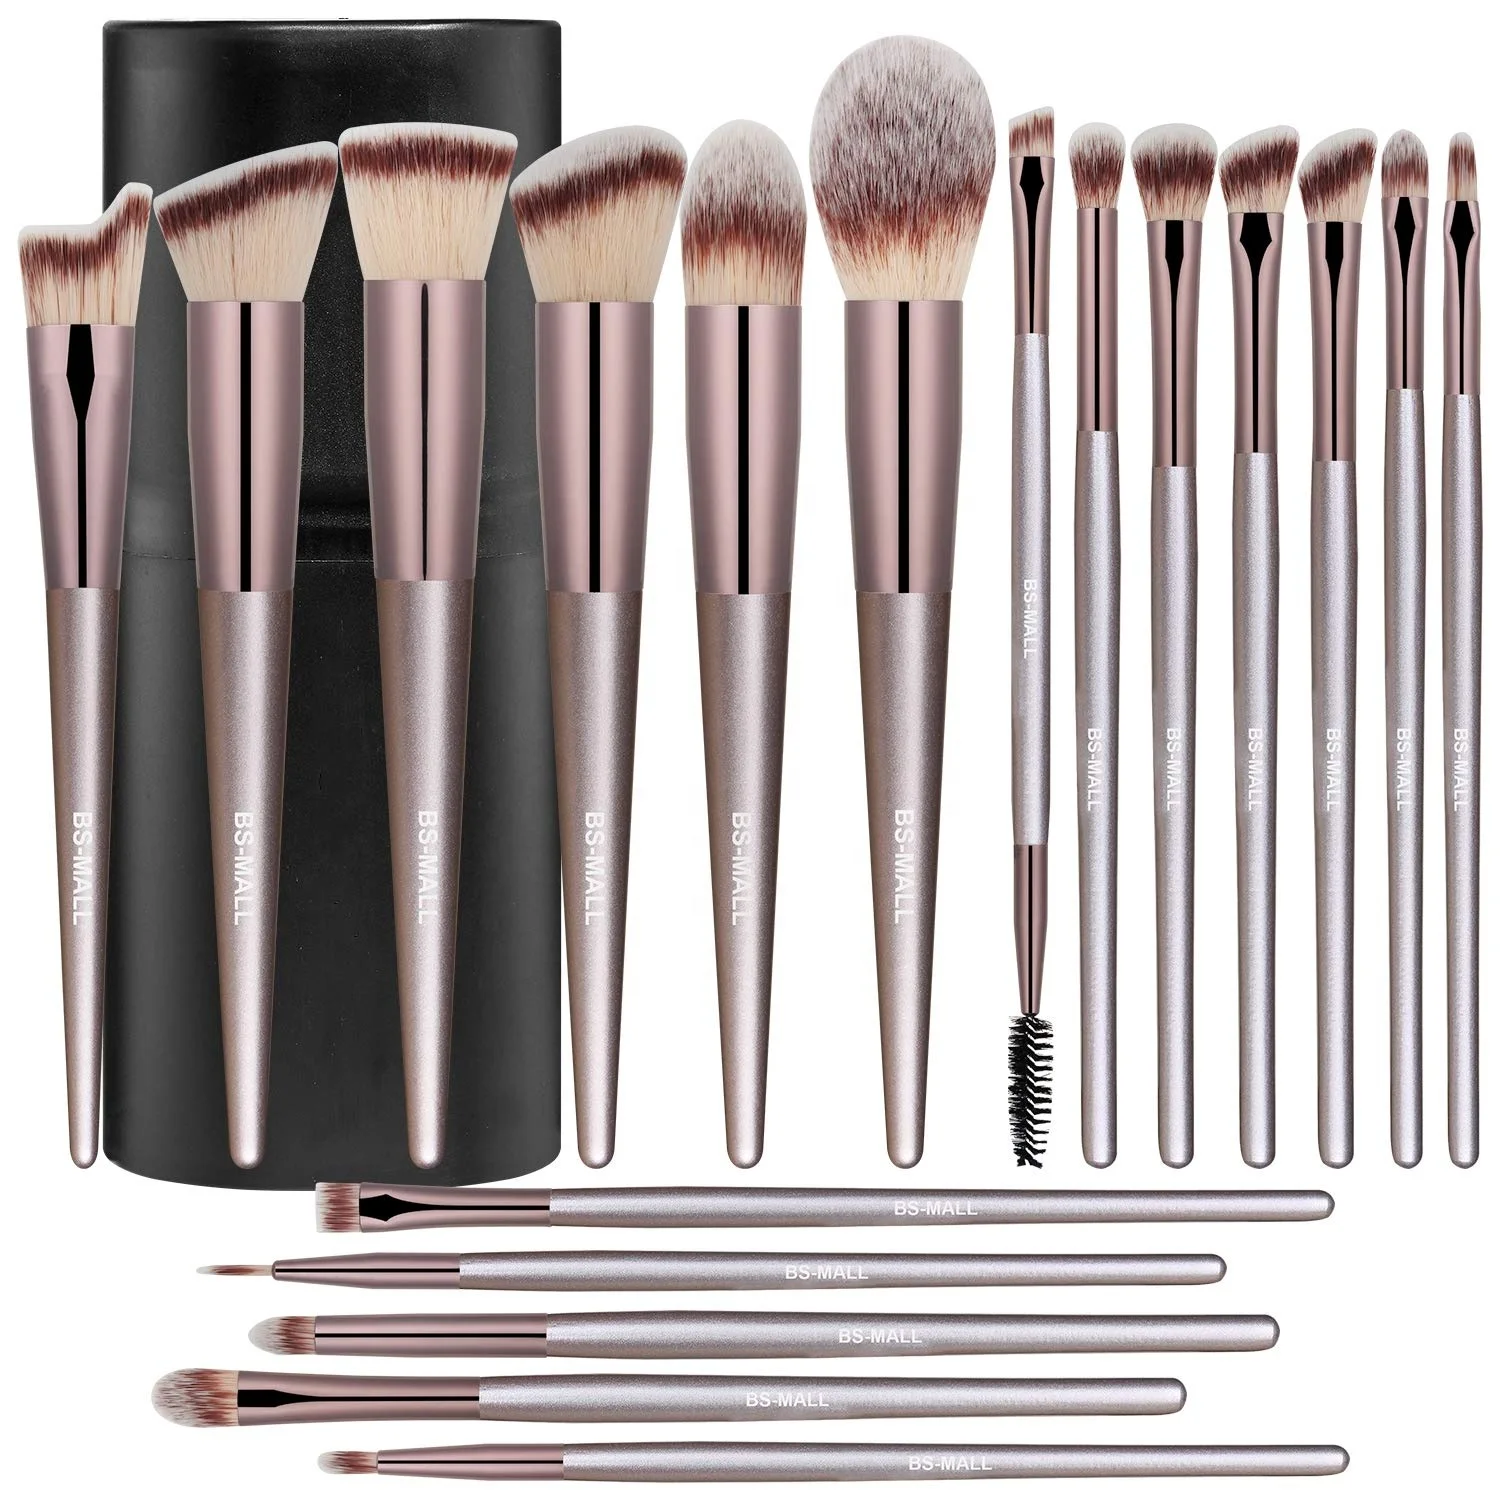 

BS-MALL 18pcs Champagne Gold Makeup Brush Amazon Best Custom Makeup Cosmetic Brushes Set With Brush Holder, Picture or customized color